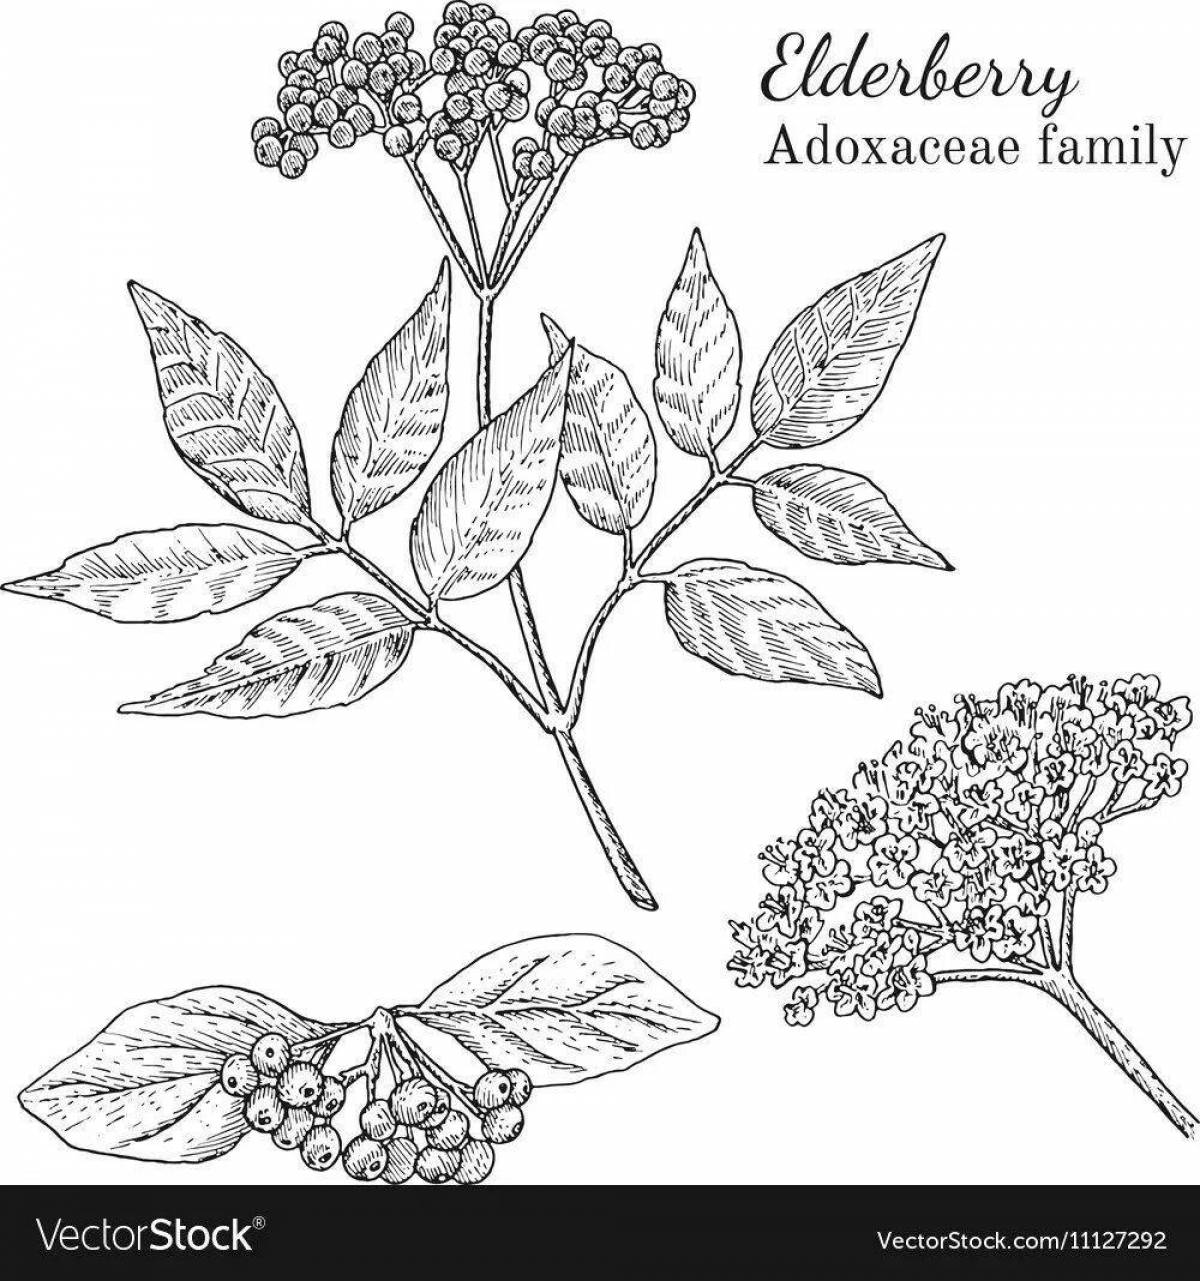 Coloring book shiny red elderberry